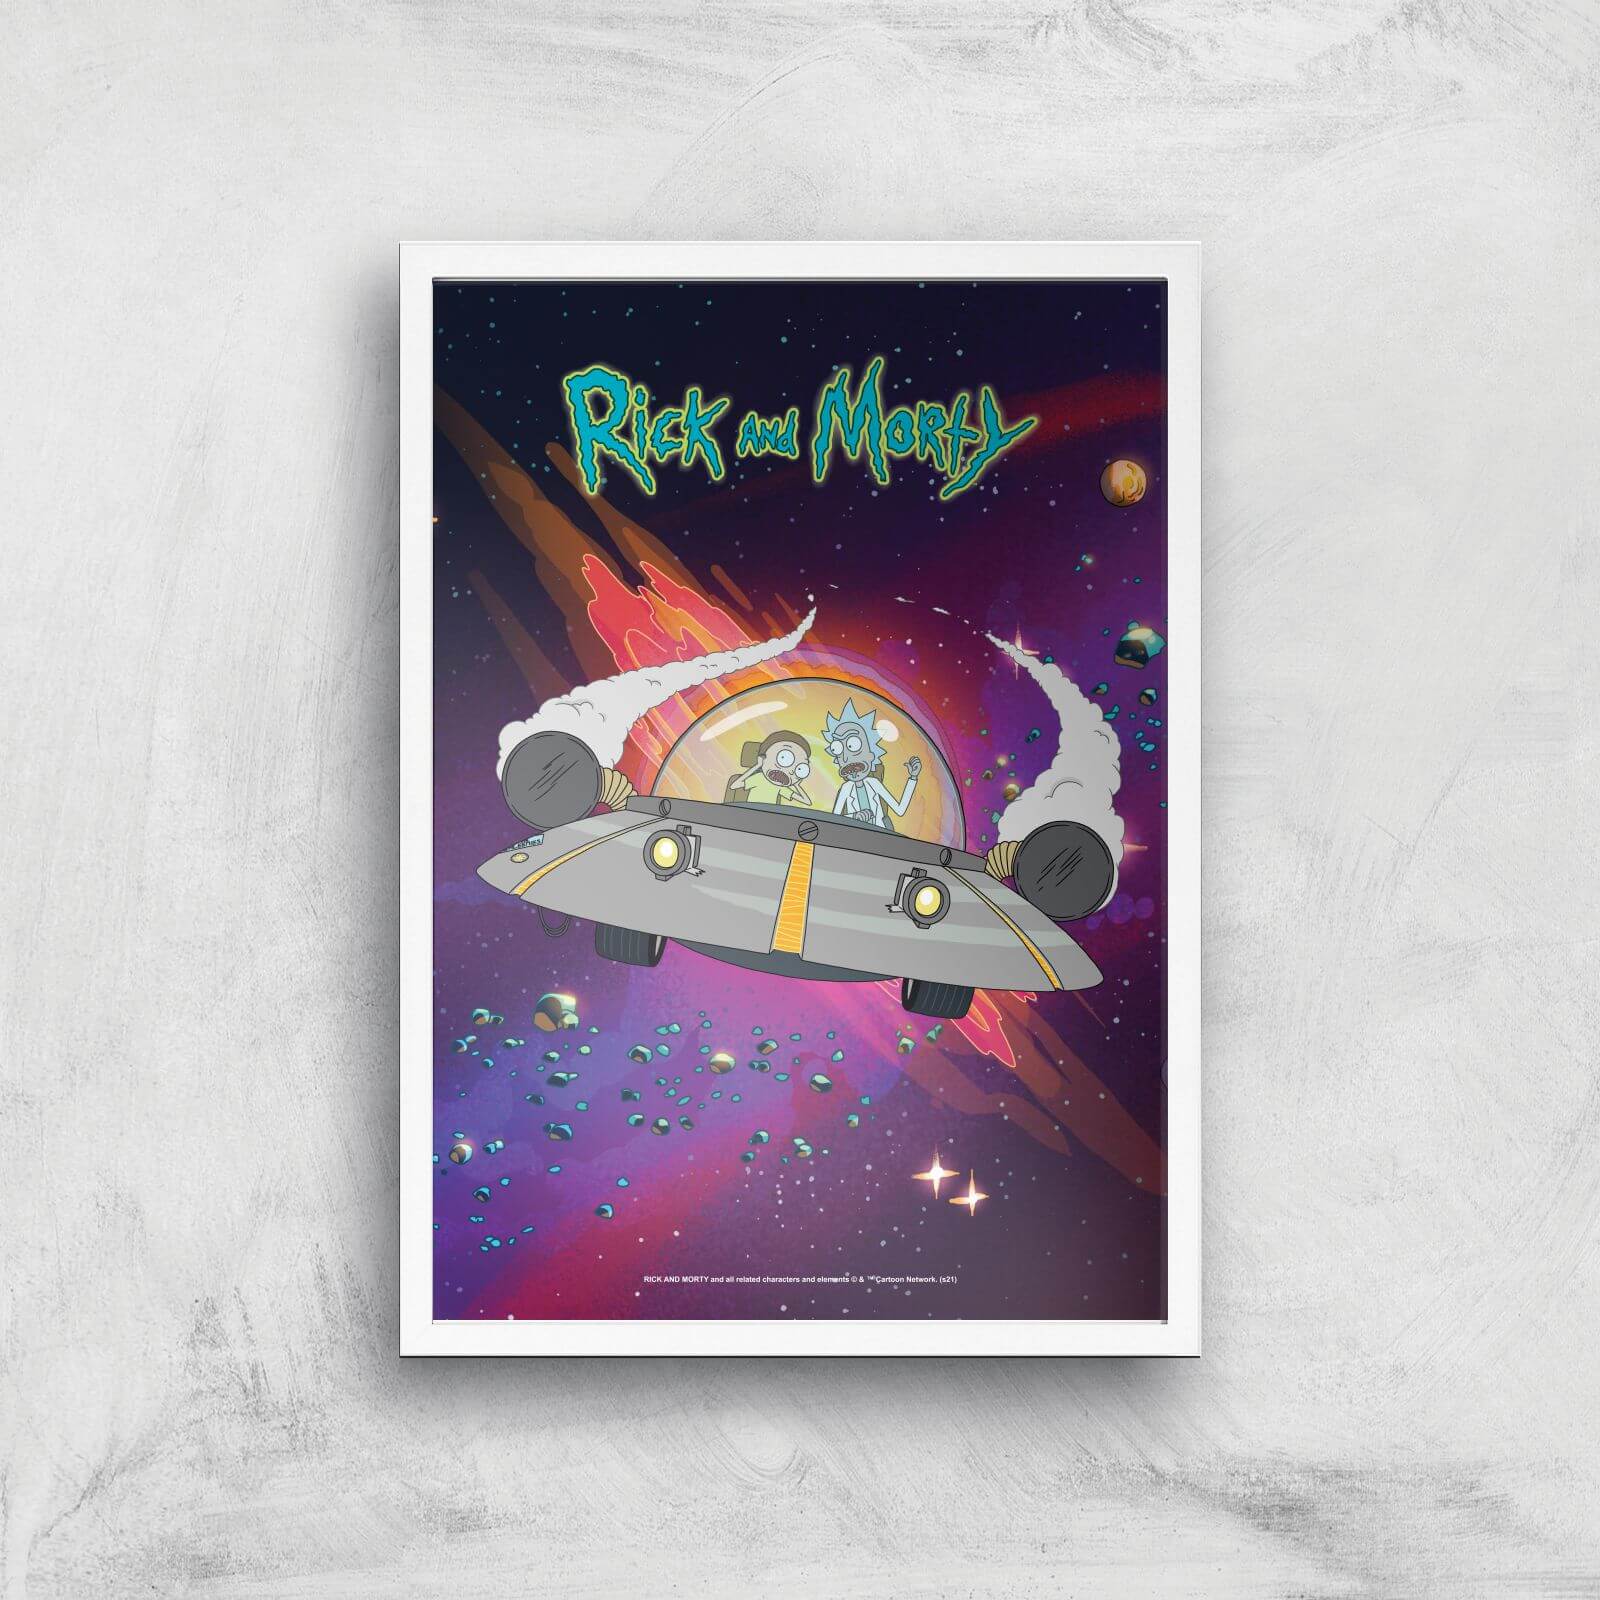 Rick and Morty Rocket Adventure Giclee Art Print - A3 - White Frame